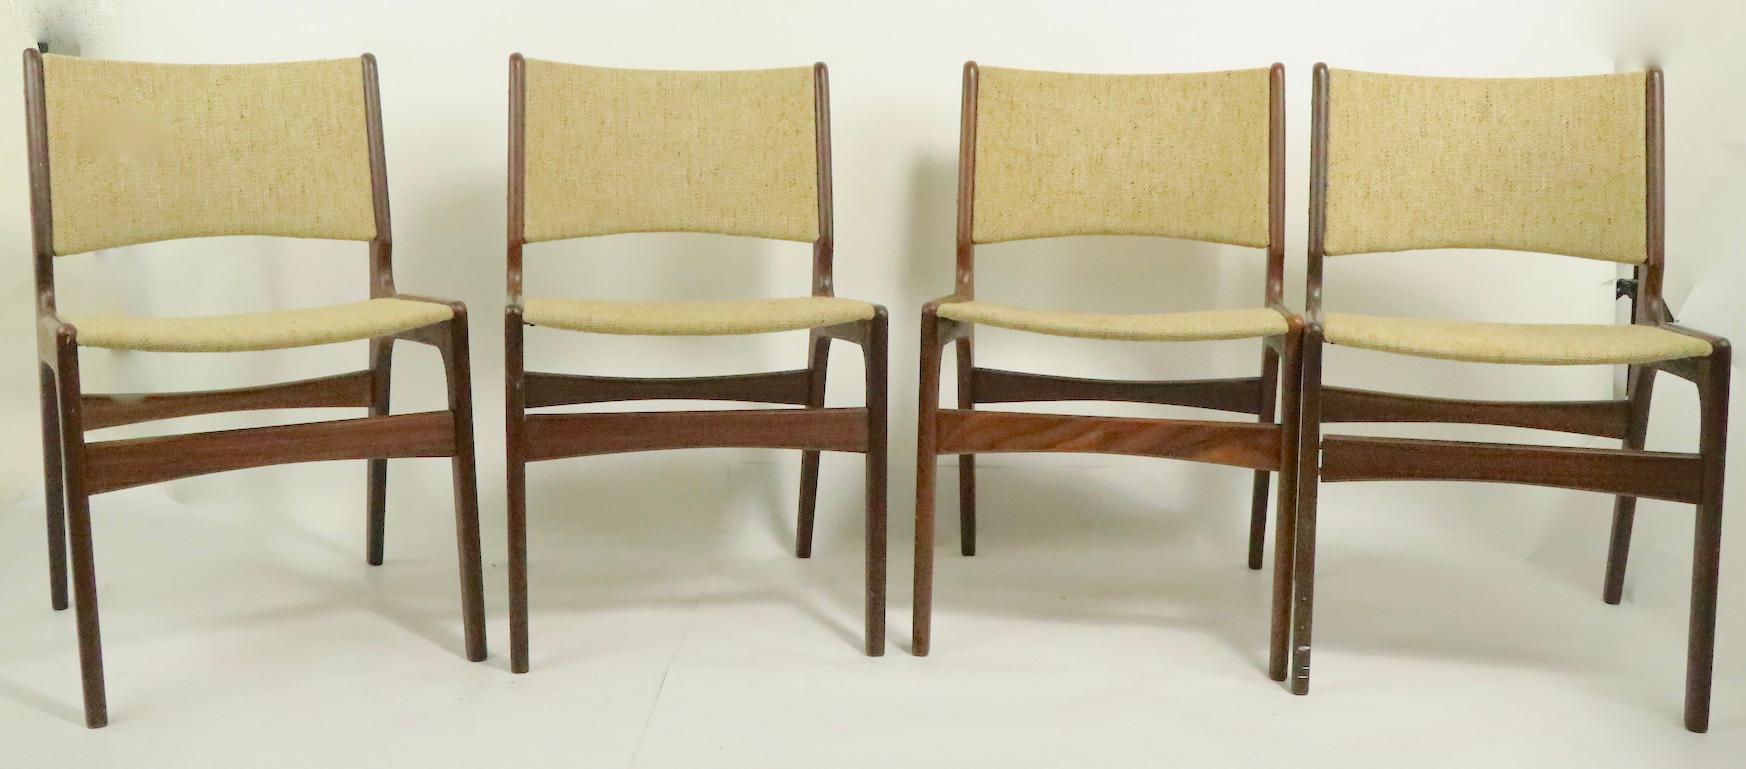 4 Danish Modern Dining Chairs by Odense Maskinsnedkeri In Good Condition For Sale In New York, NY